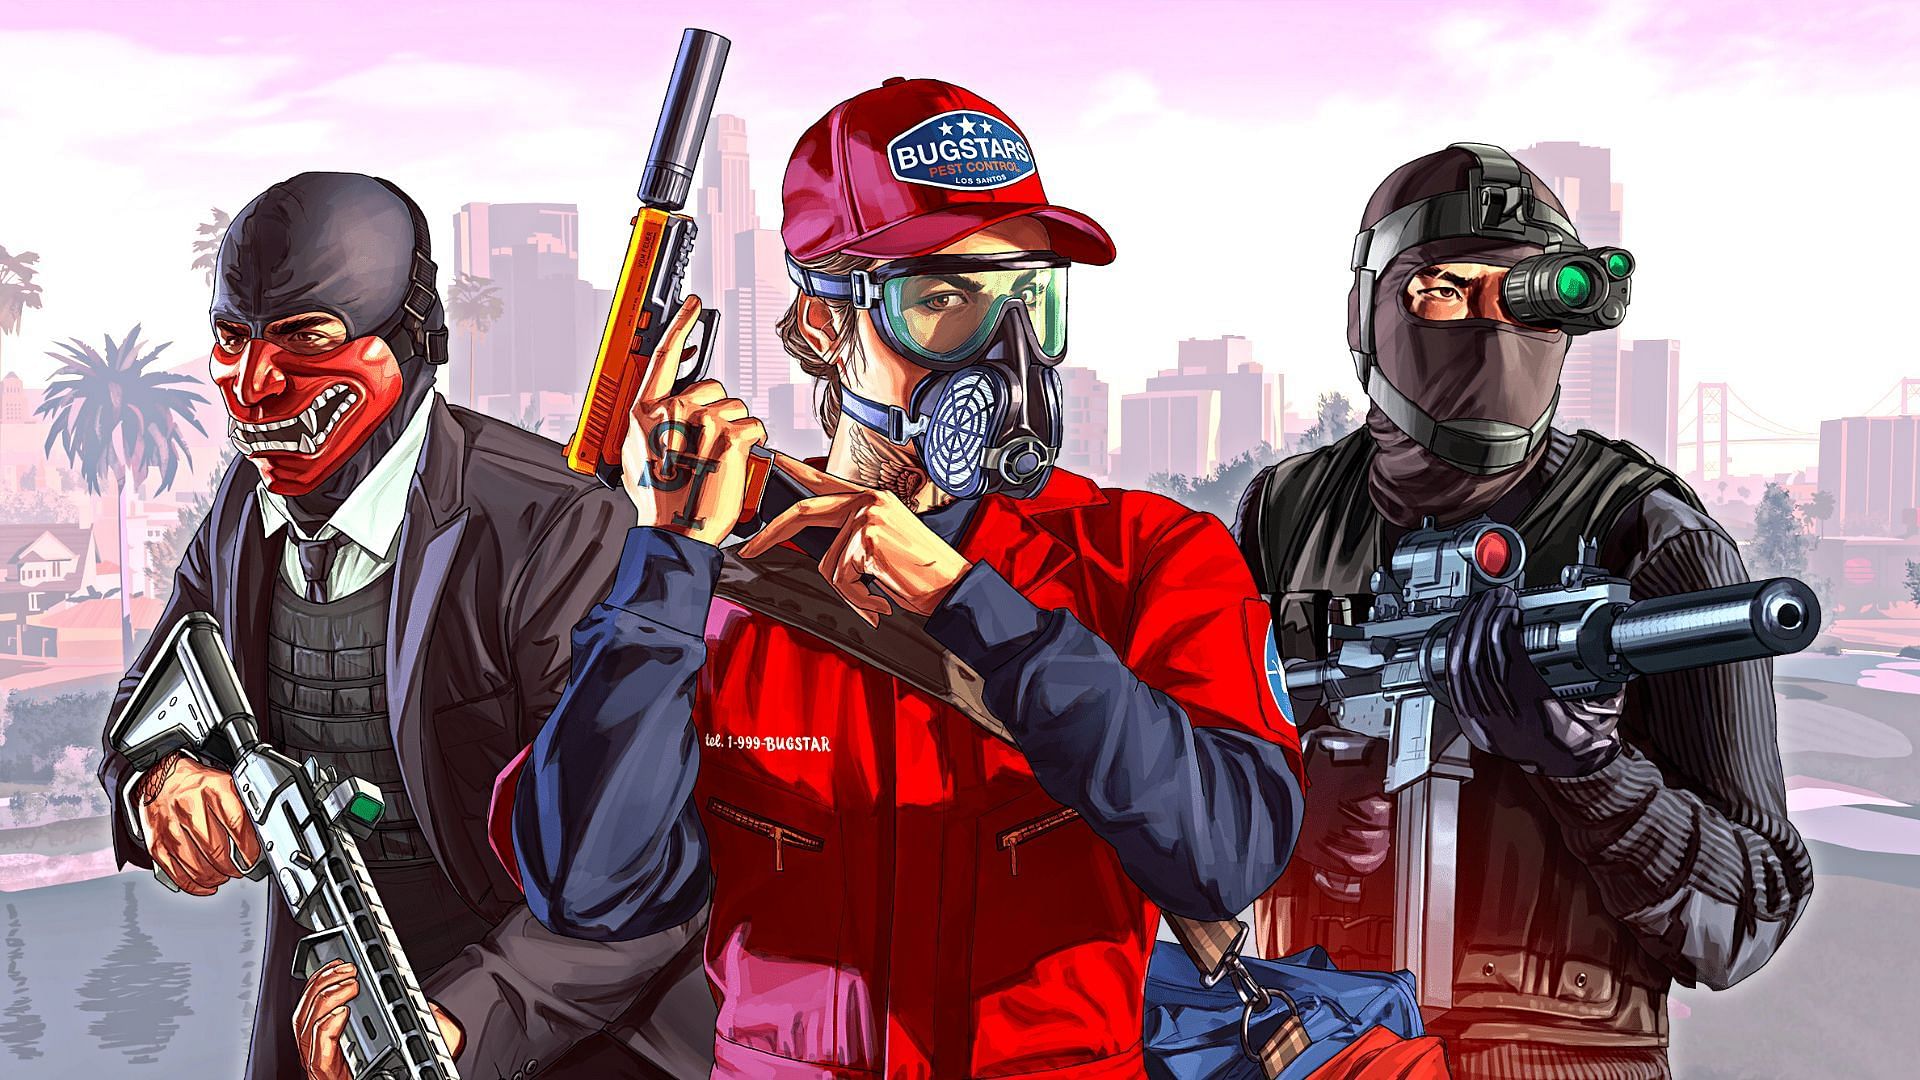 A brief report about the new PC exploits that reportedly compromises GTA Online players data and accounts (Image via Sportskeeda)